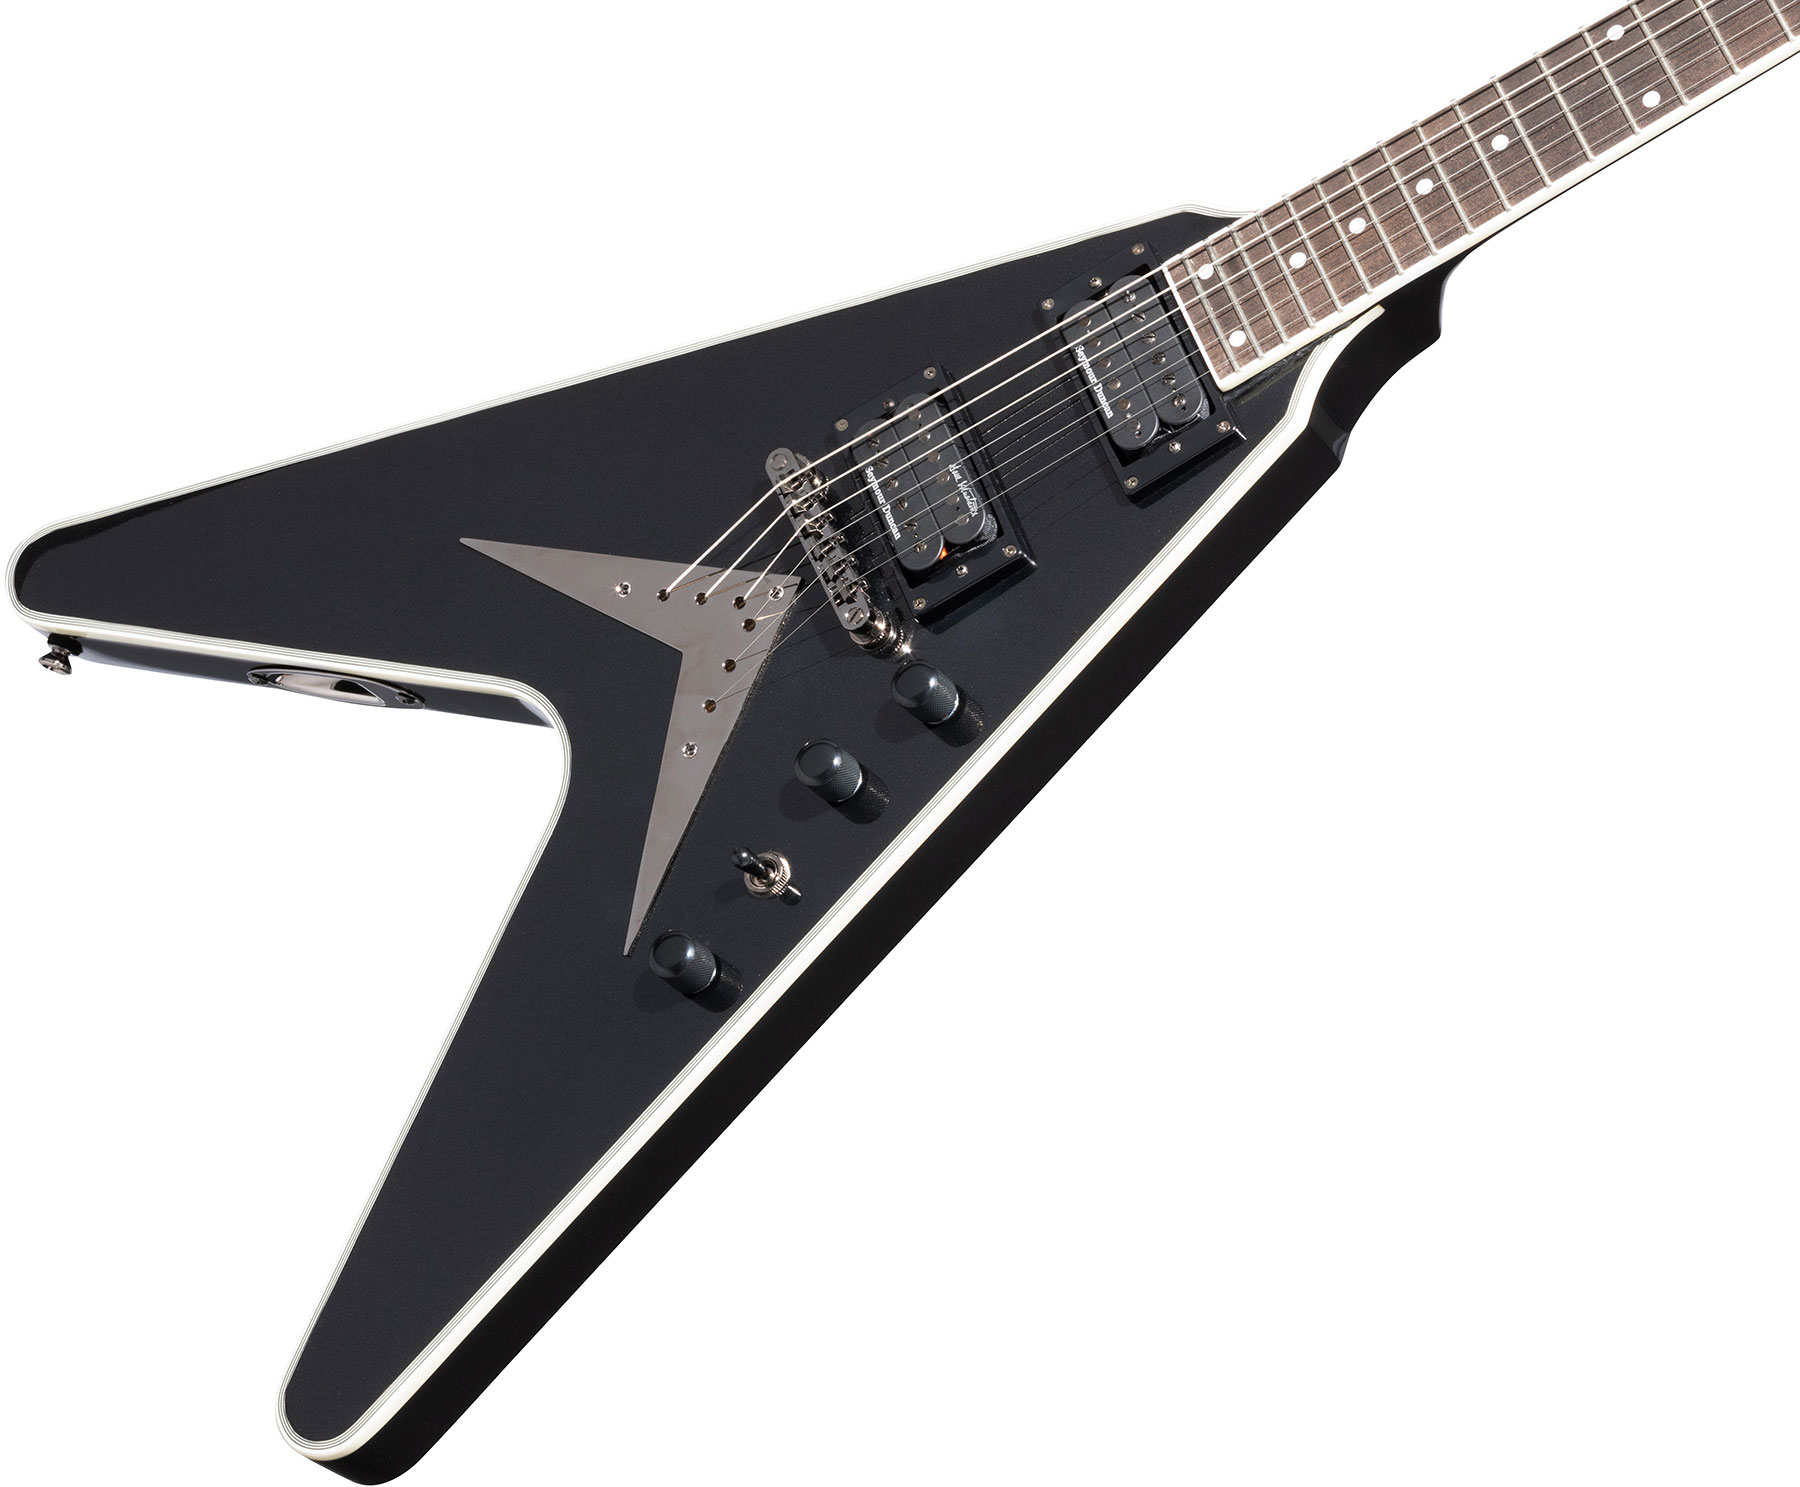 Epiphone Dave Mustaine Flying V Prophecy 2h Fishman Fluence Ht Eb - Black Metallic - Guitarra electrica metalica - Variation 3